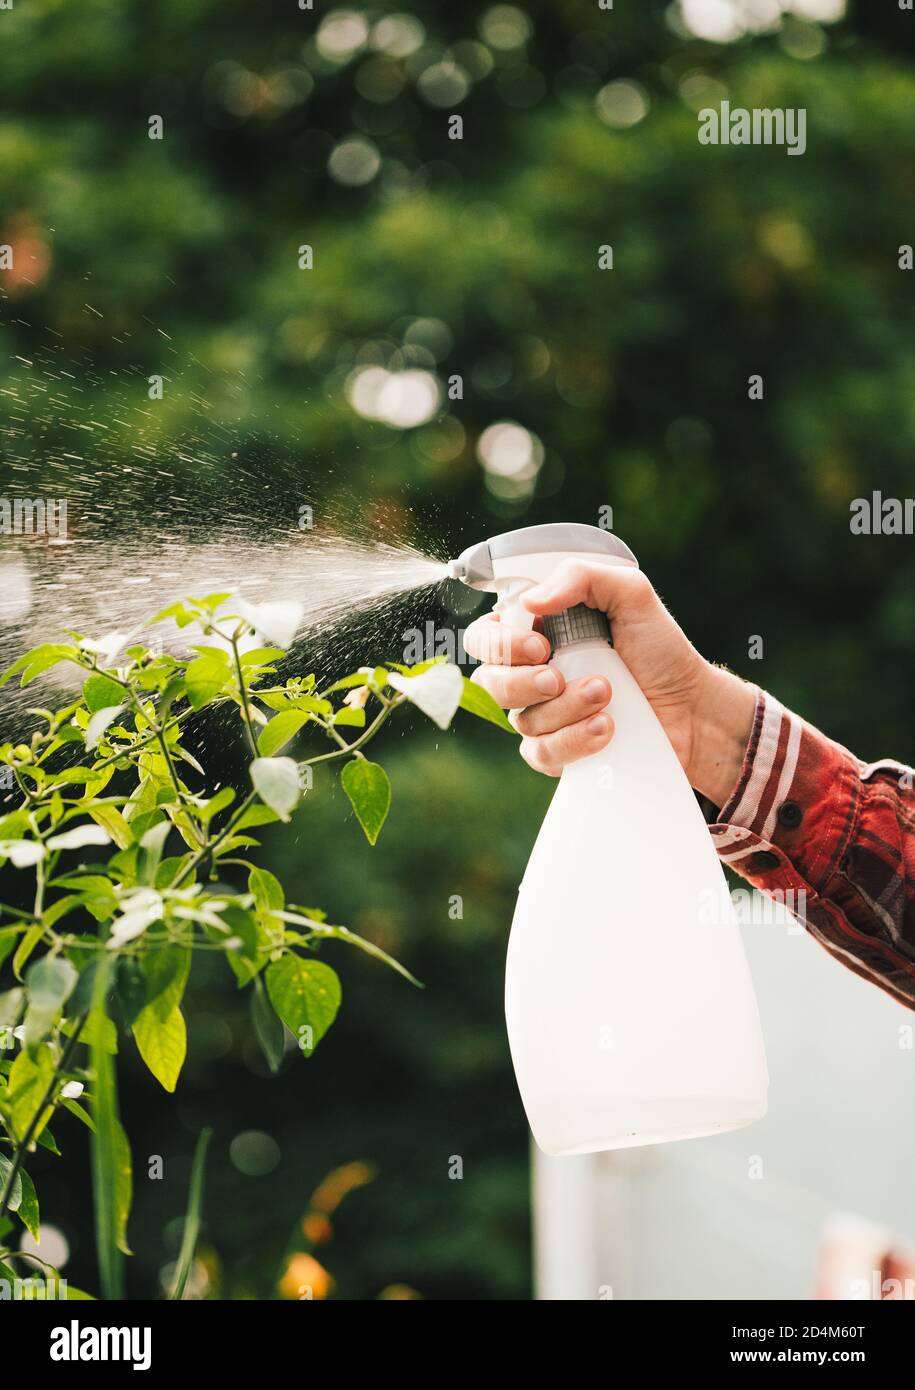 Unrecognisable person watering plants with a spray dispenser Stock Photo